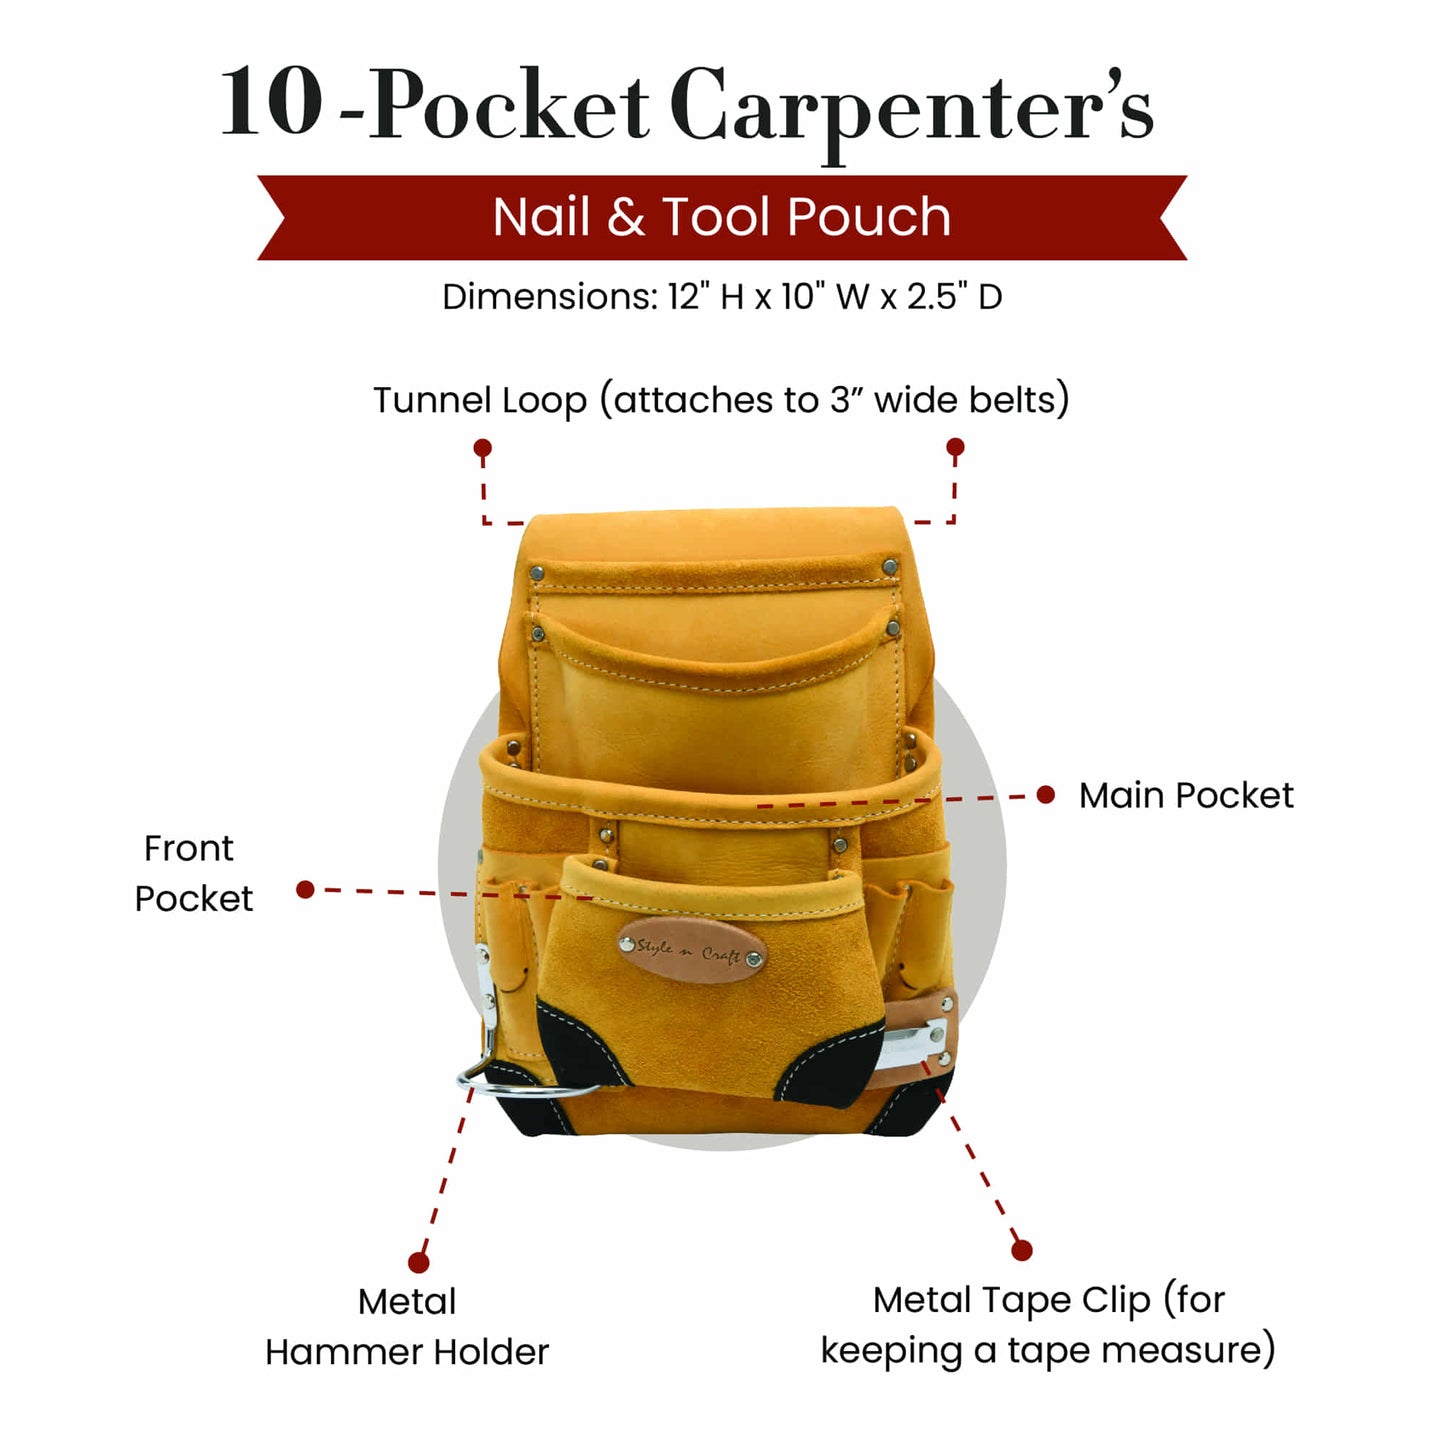 Style n Craft 93924 - 10 Pocket Carpenter's Nail & Tool Pouch in Yellow Top Grain Leather with Reinforced Black Leather Corners, Hammer Holder & Tape Clip - Front View Showing Details